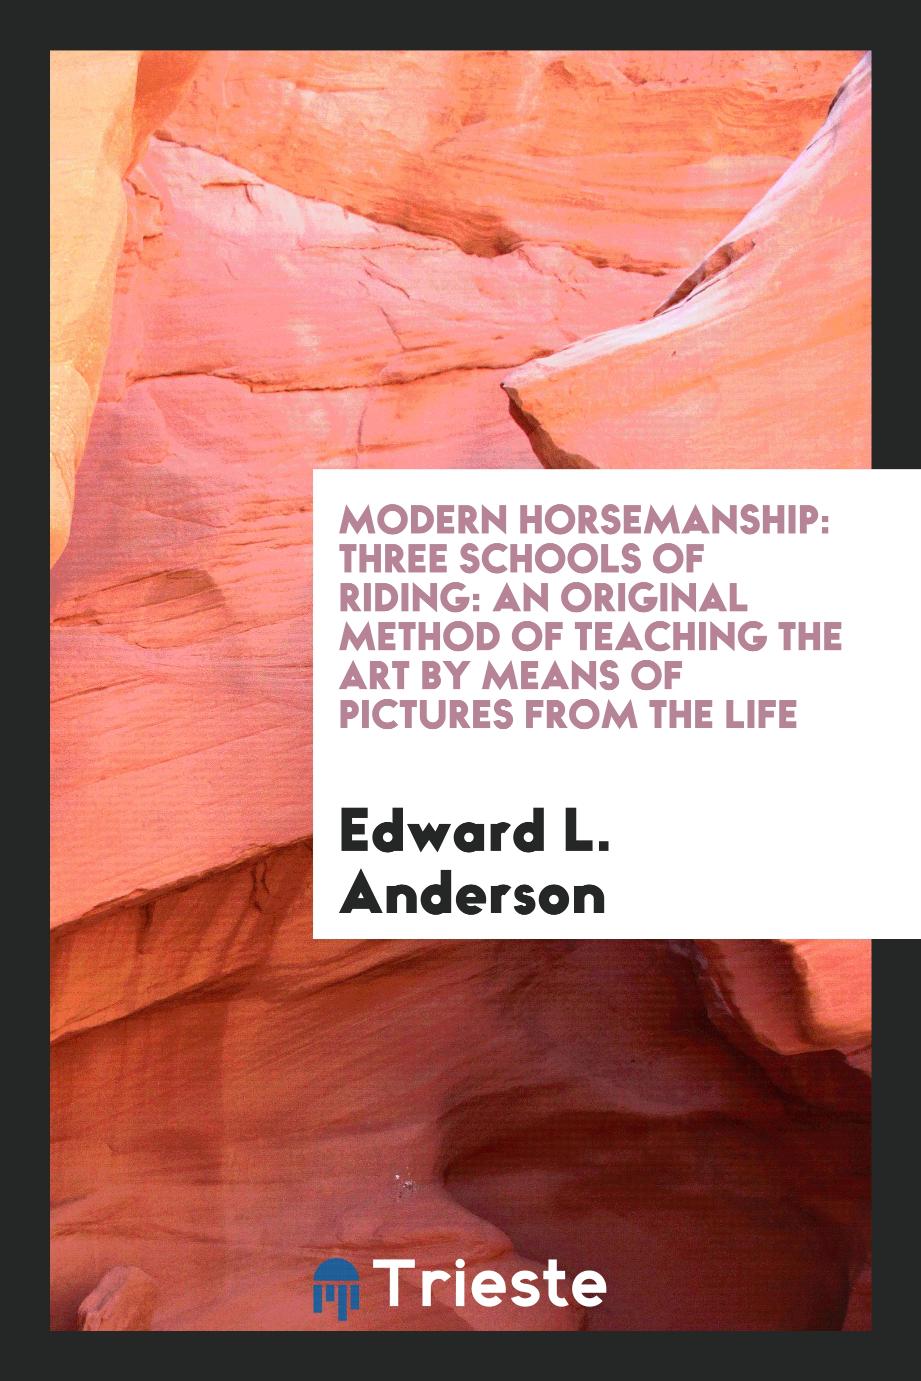 Modern Horsemanship: Three Schools of Riding: An Original Method of Teaching the Art by Means of Pictures from the Life